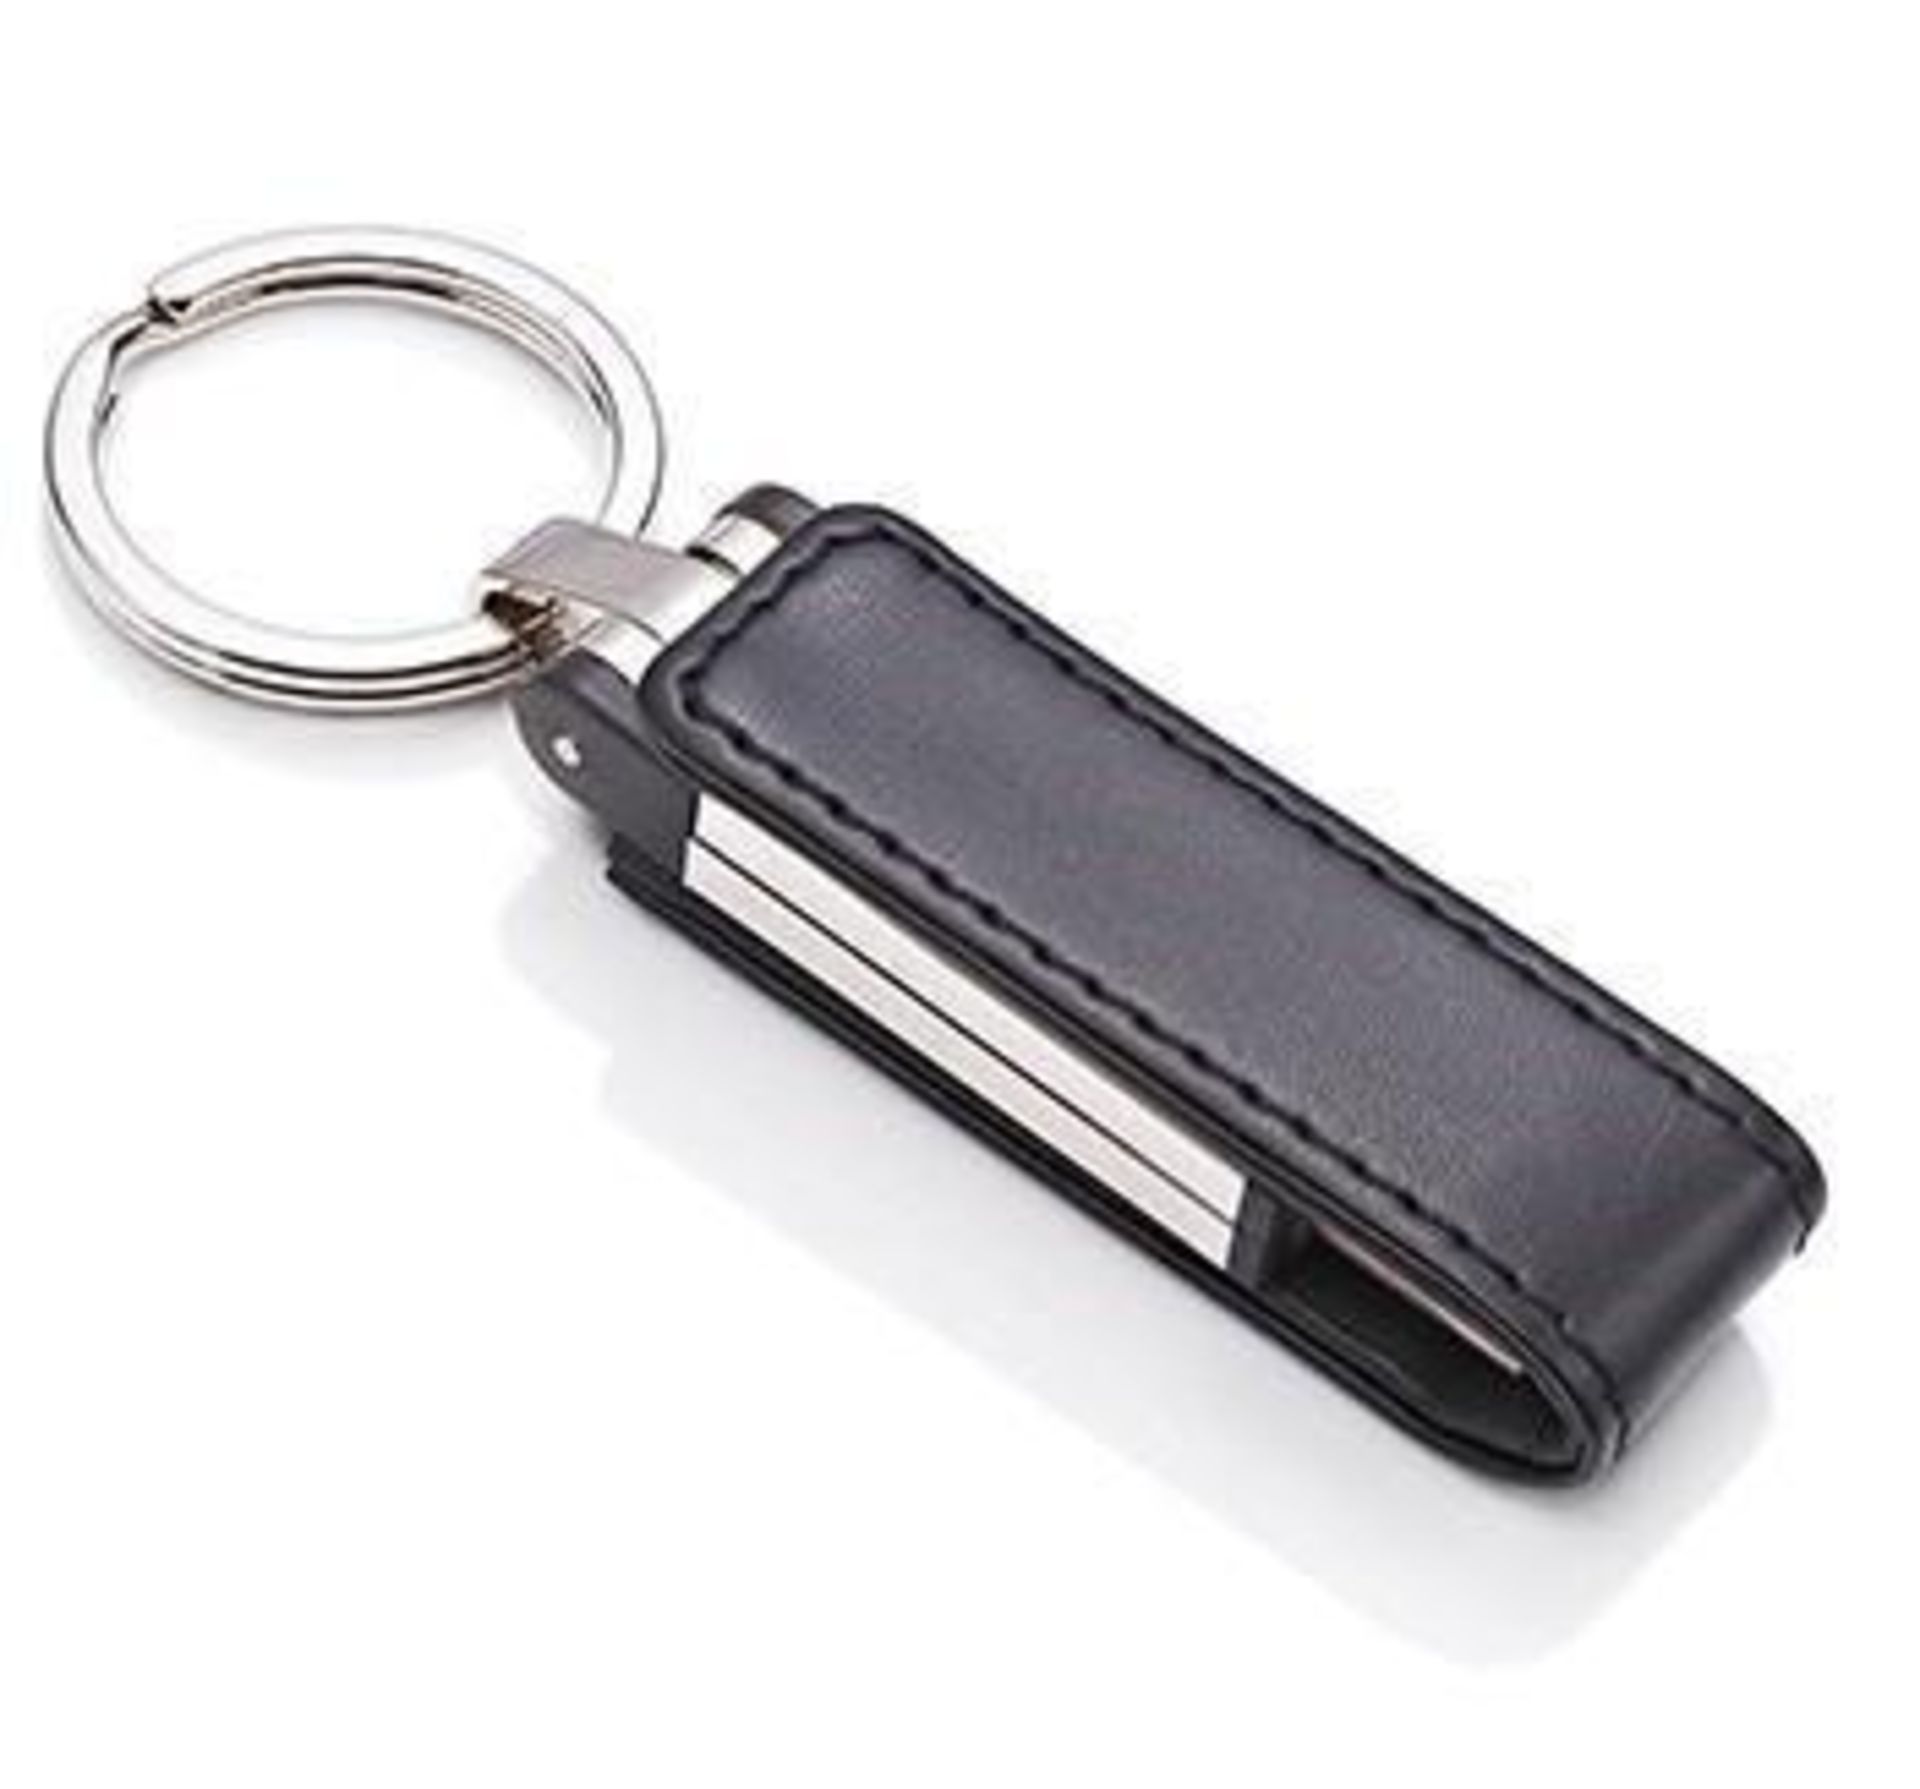 1 x ICE London Silver Plated 2GB USB Flashdrive Keyring - Features A Genuine Leather Wrap With Magne - Image 5 of 6